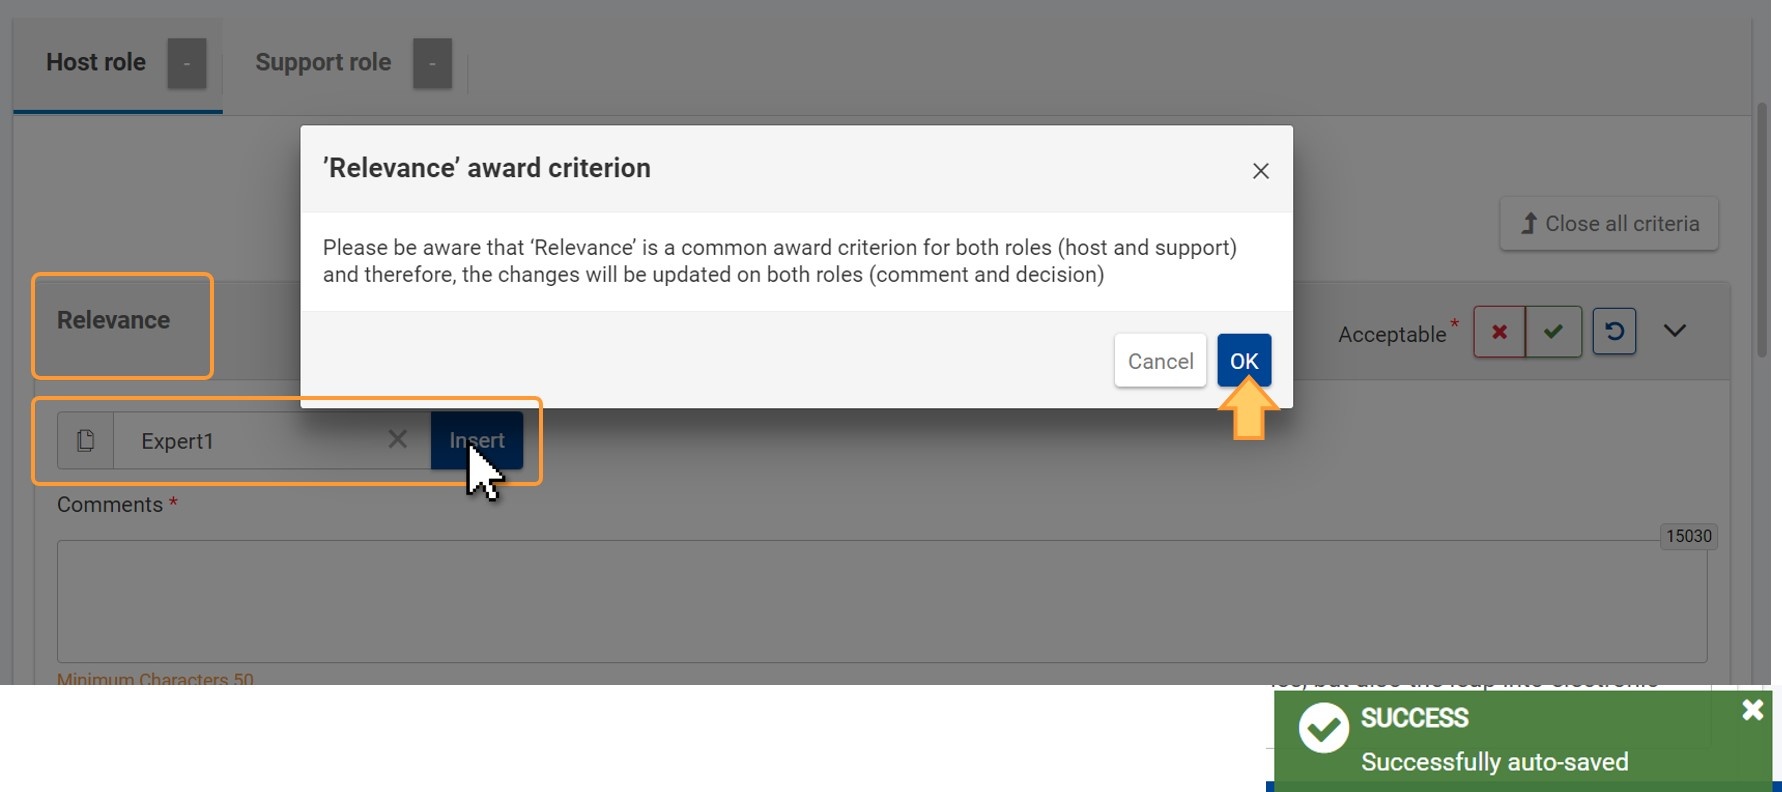 Pop up for award criterion Relevance displays when inserting expert comments